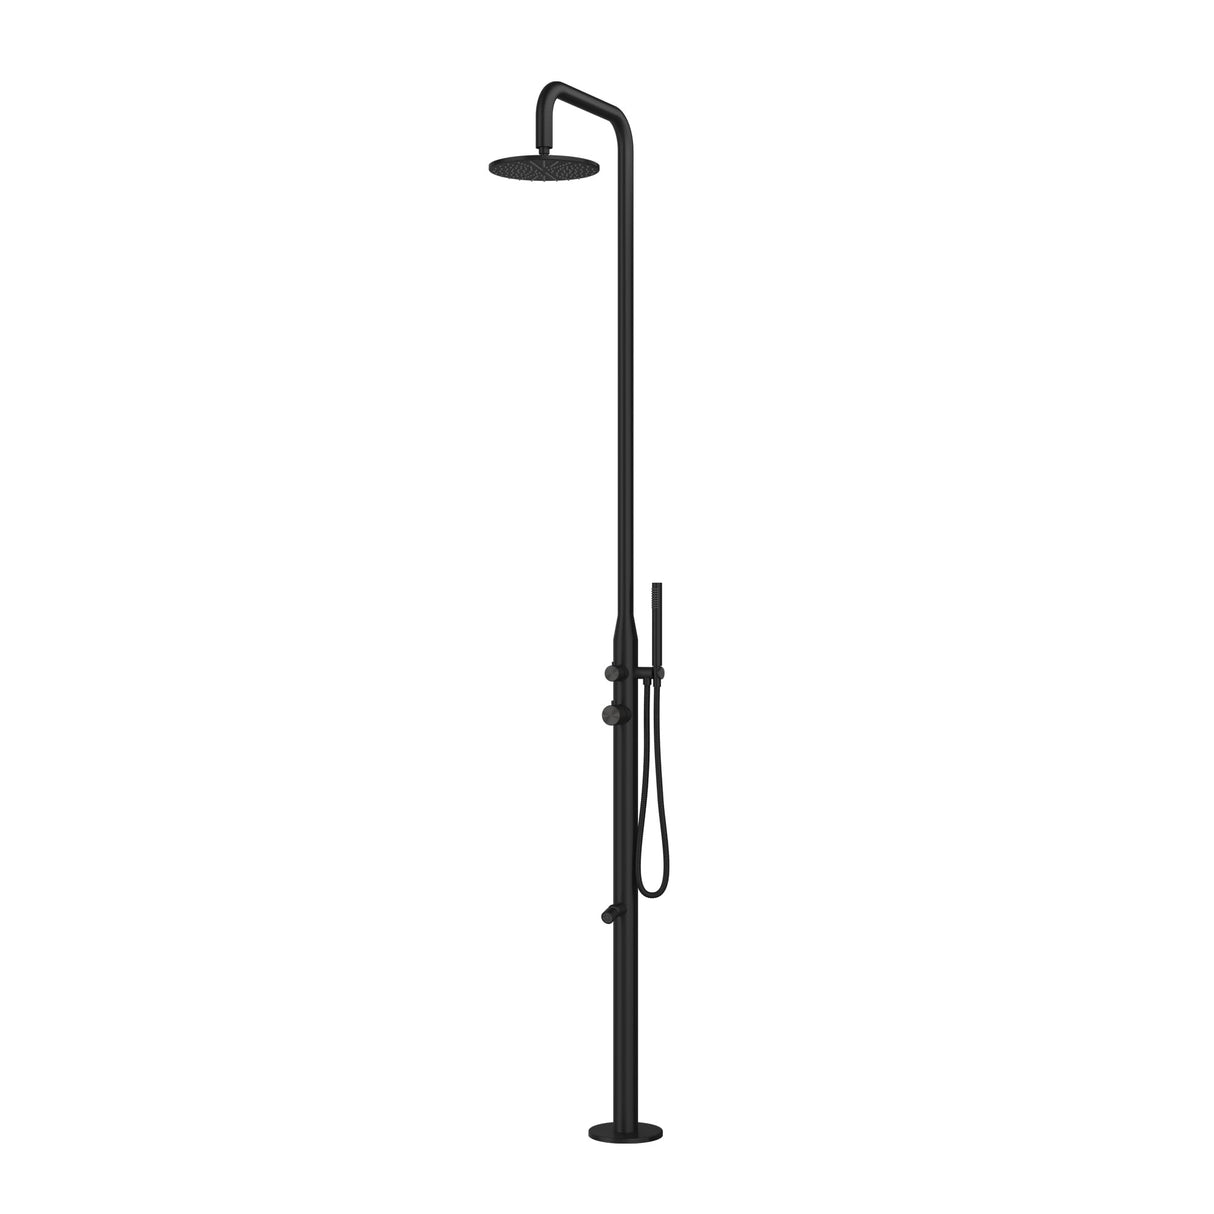 PULSE ShowerSpas 1065-MB Pipeline Outdoor Shower System, 10" Showerhead, Pivoting Arm, Hand Shower, Foot Spout Rinse, 316 Stainless-Steel Body, Matte Black